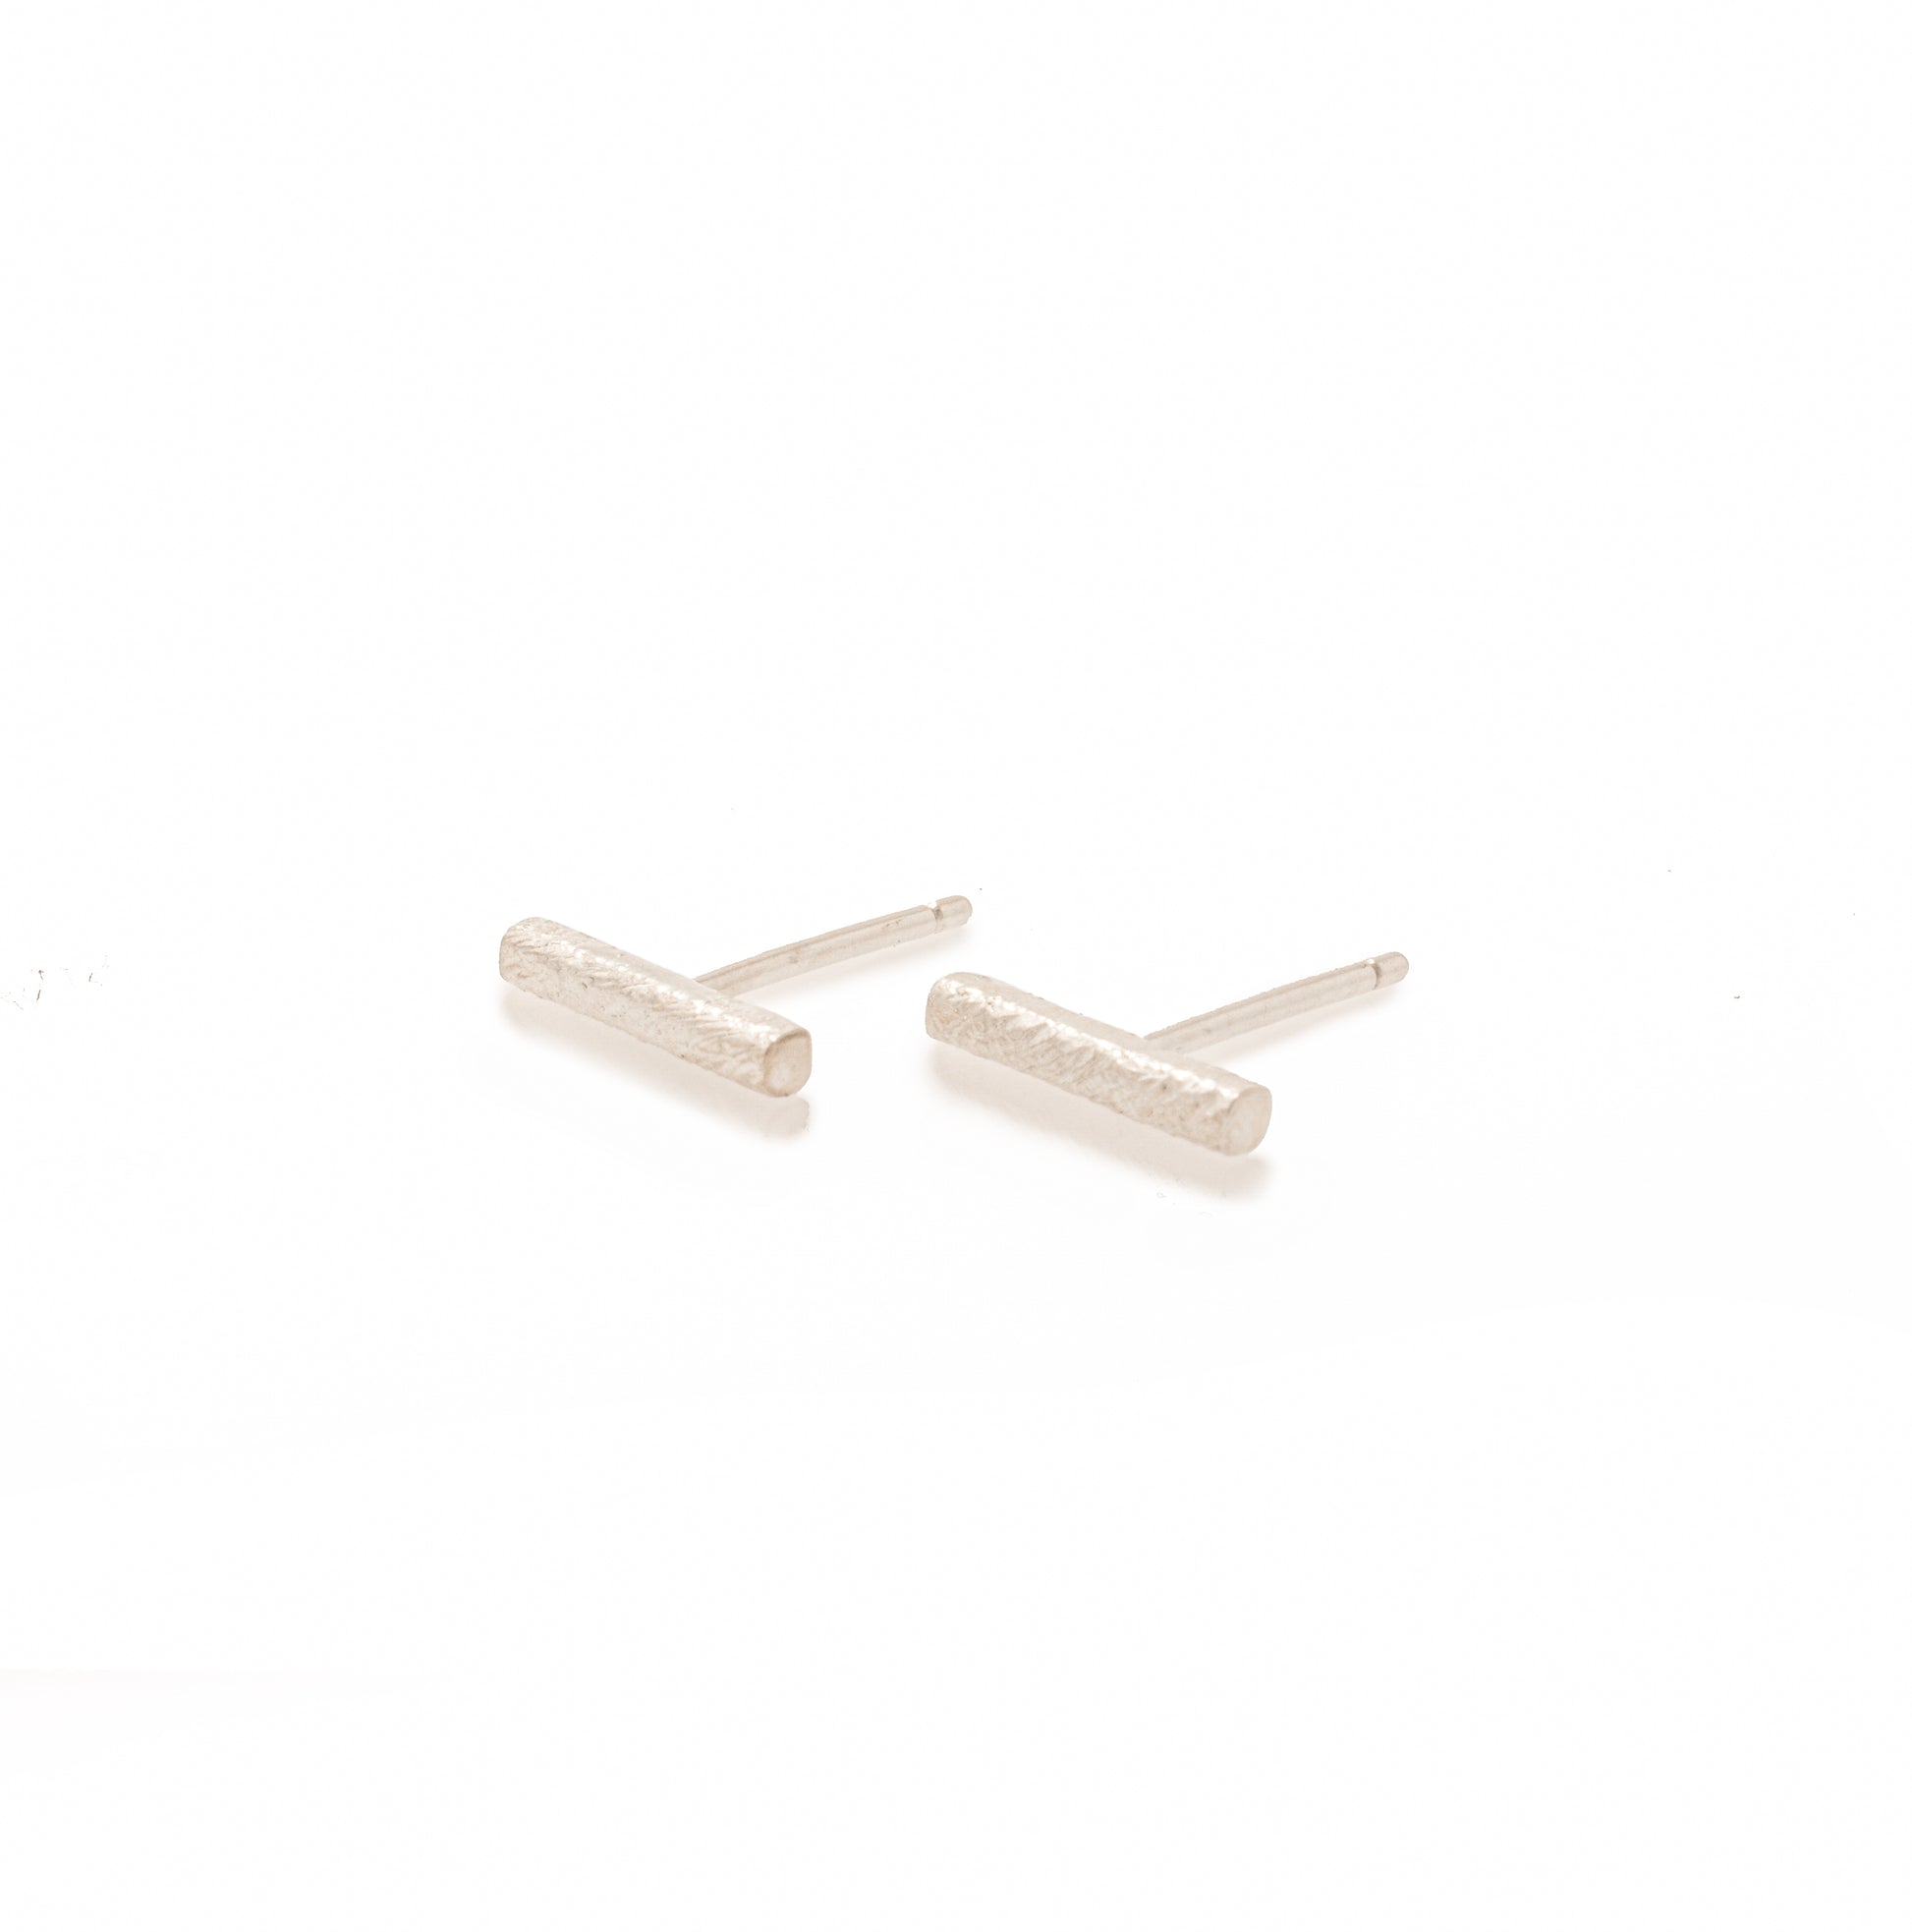 10mm Feathered Bar Studs